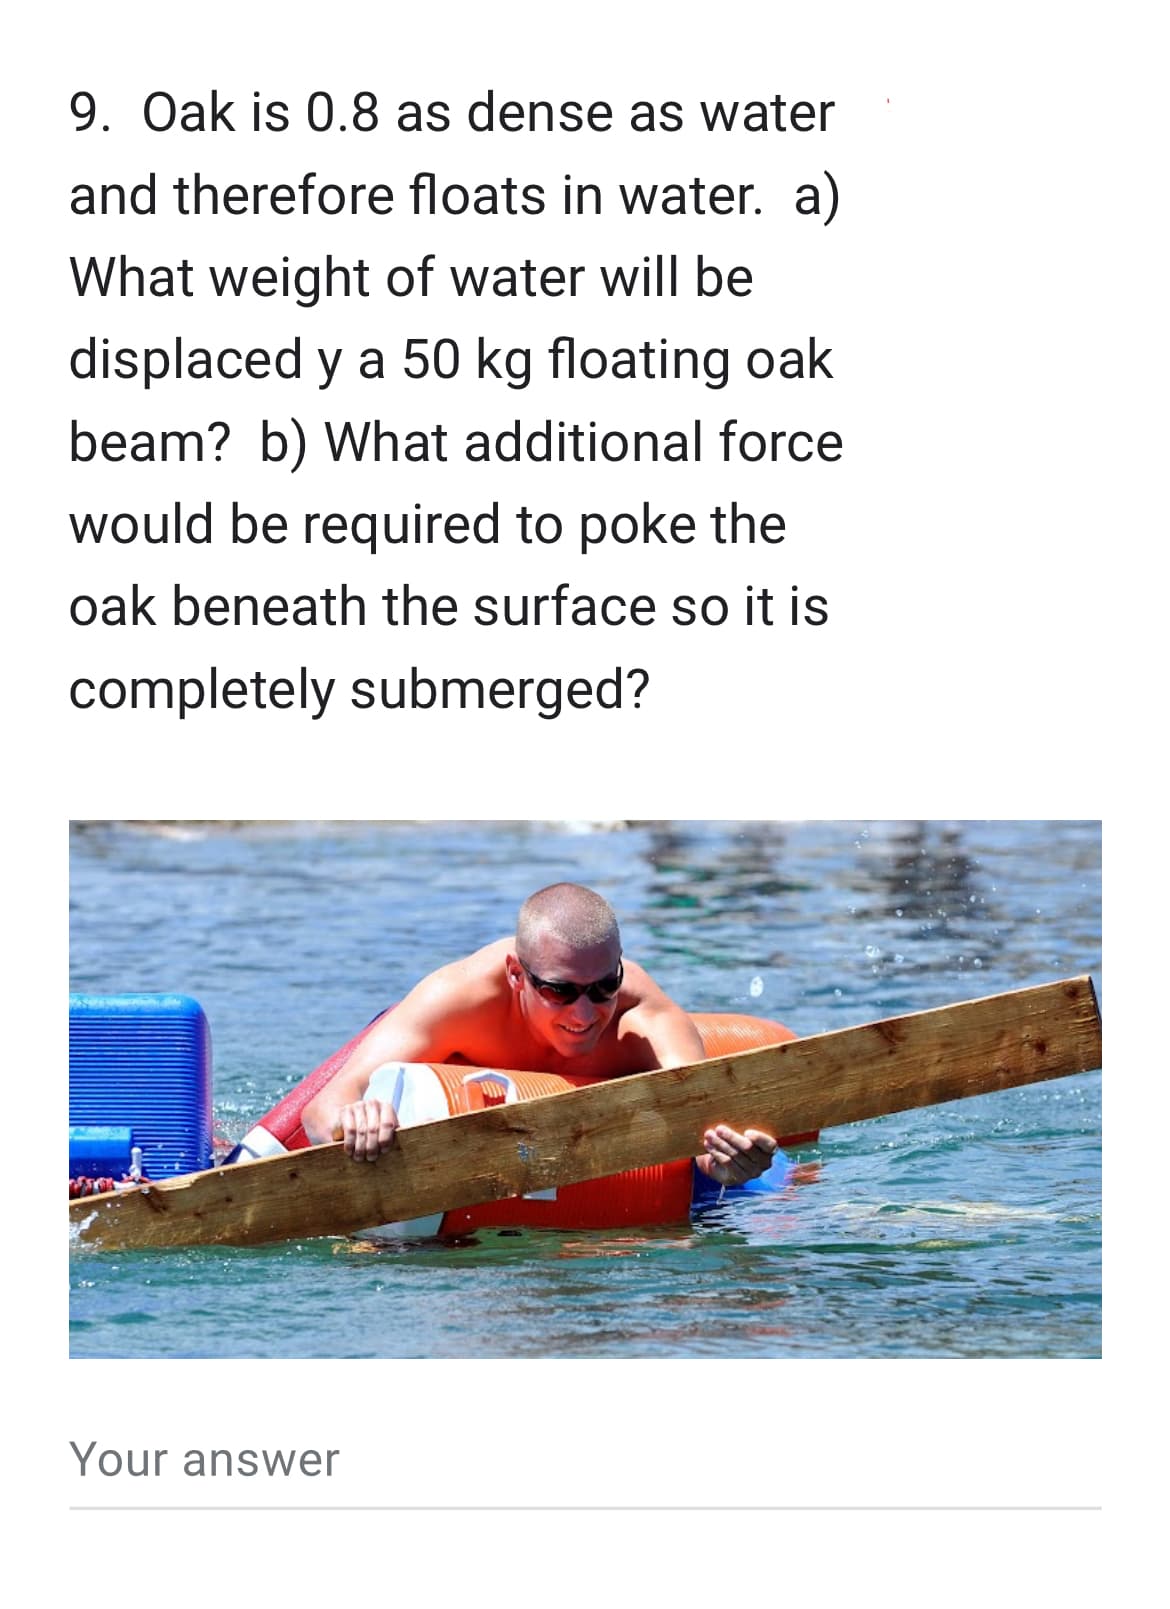 9. Oak is 0.8 as dense as water
and therefore floats in water. a)
What weight of water will be
displaced y a 50 kg floating oak
beam? b) What additional force
would be required to poke the
oak beneath the surface so it is
completely submerged?
Your answer